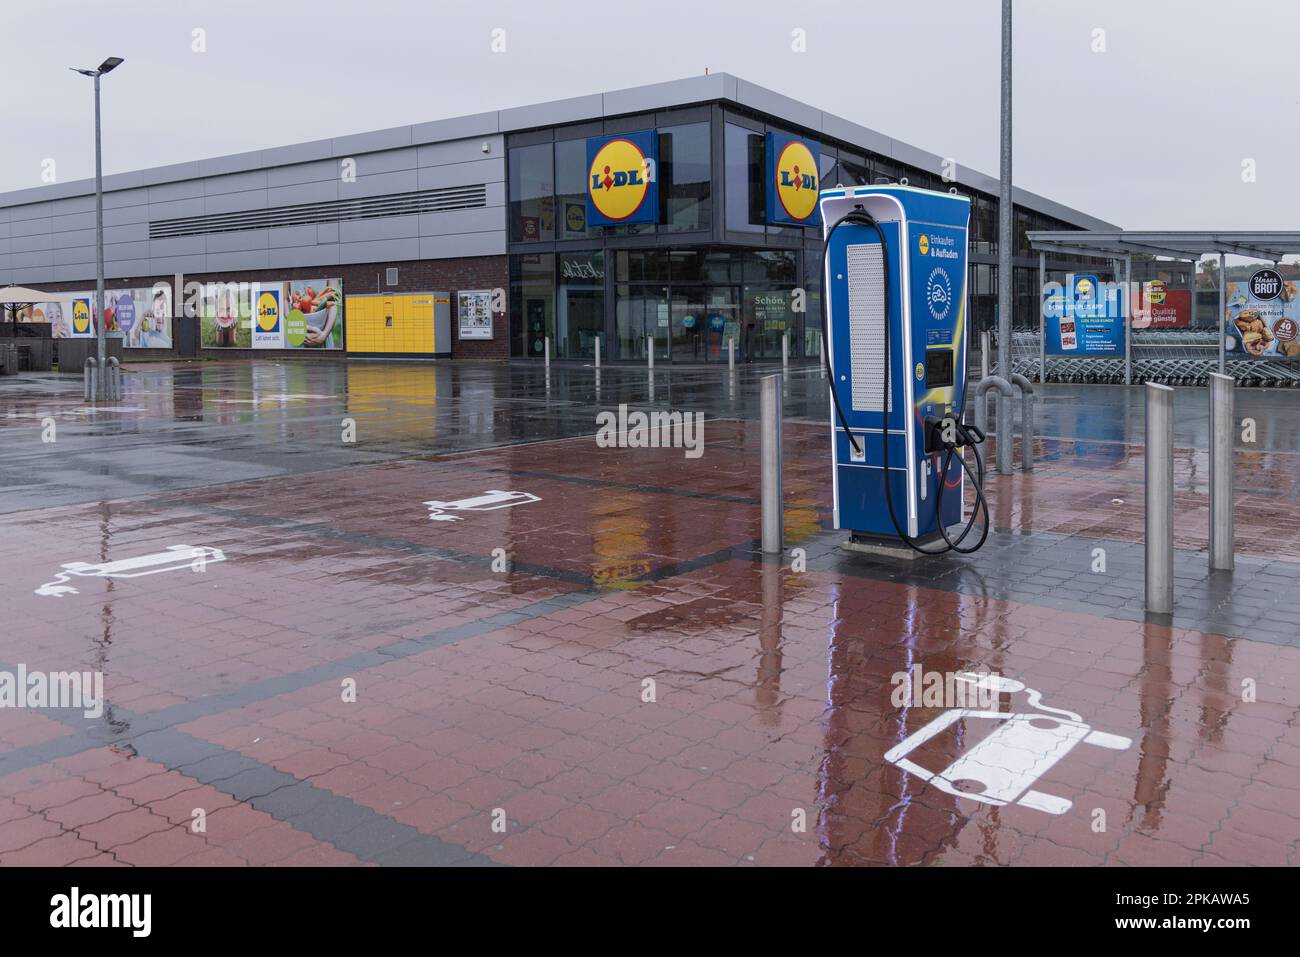 Rainy, charging station, parking lot, Lidl branch outside opening hours, closed, Freiligrathstraße, Wilhelmshaven, Lower Saxony, Germany Stock Photo